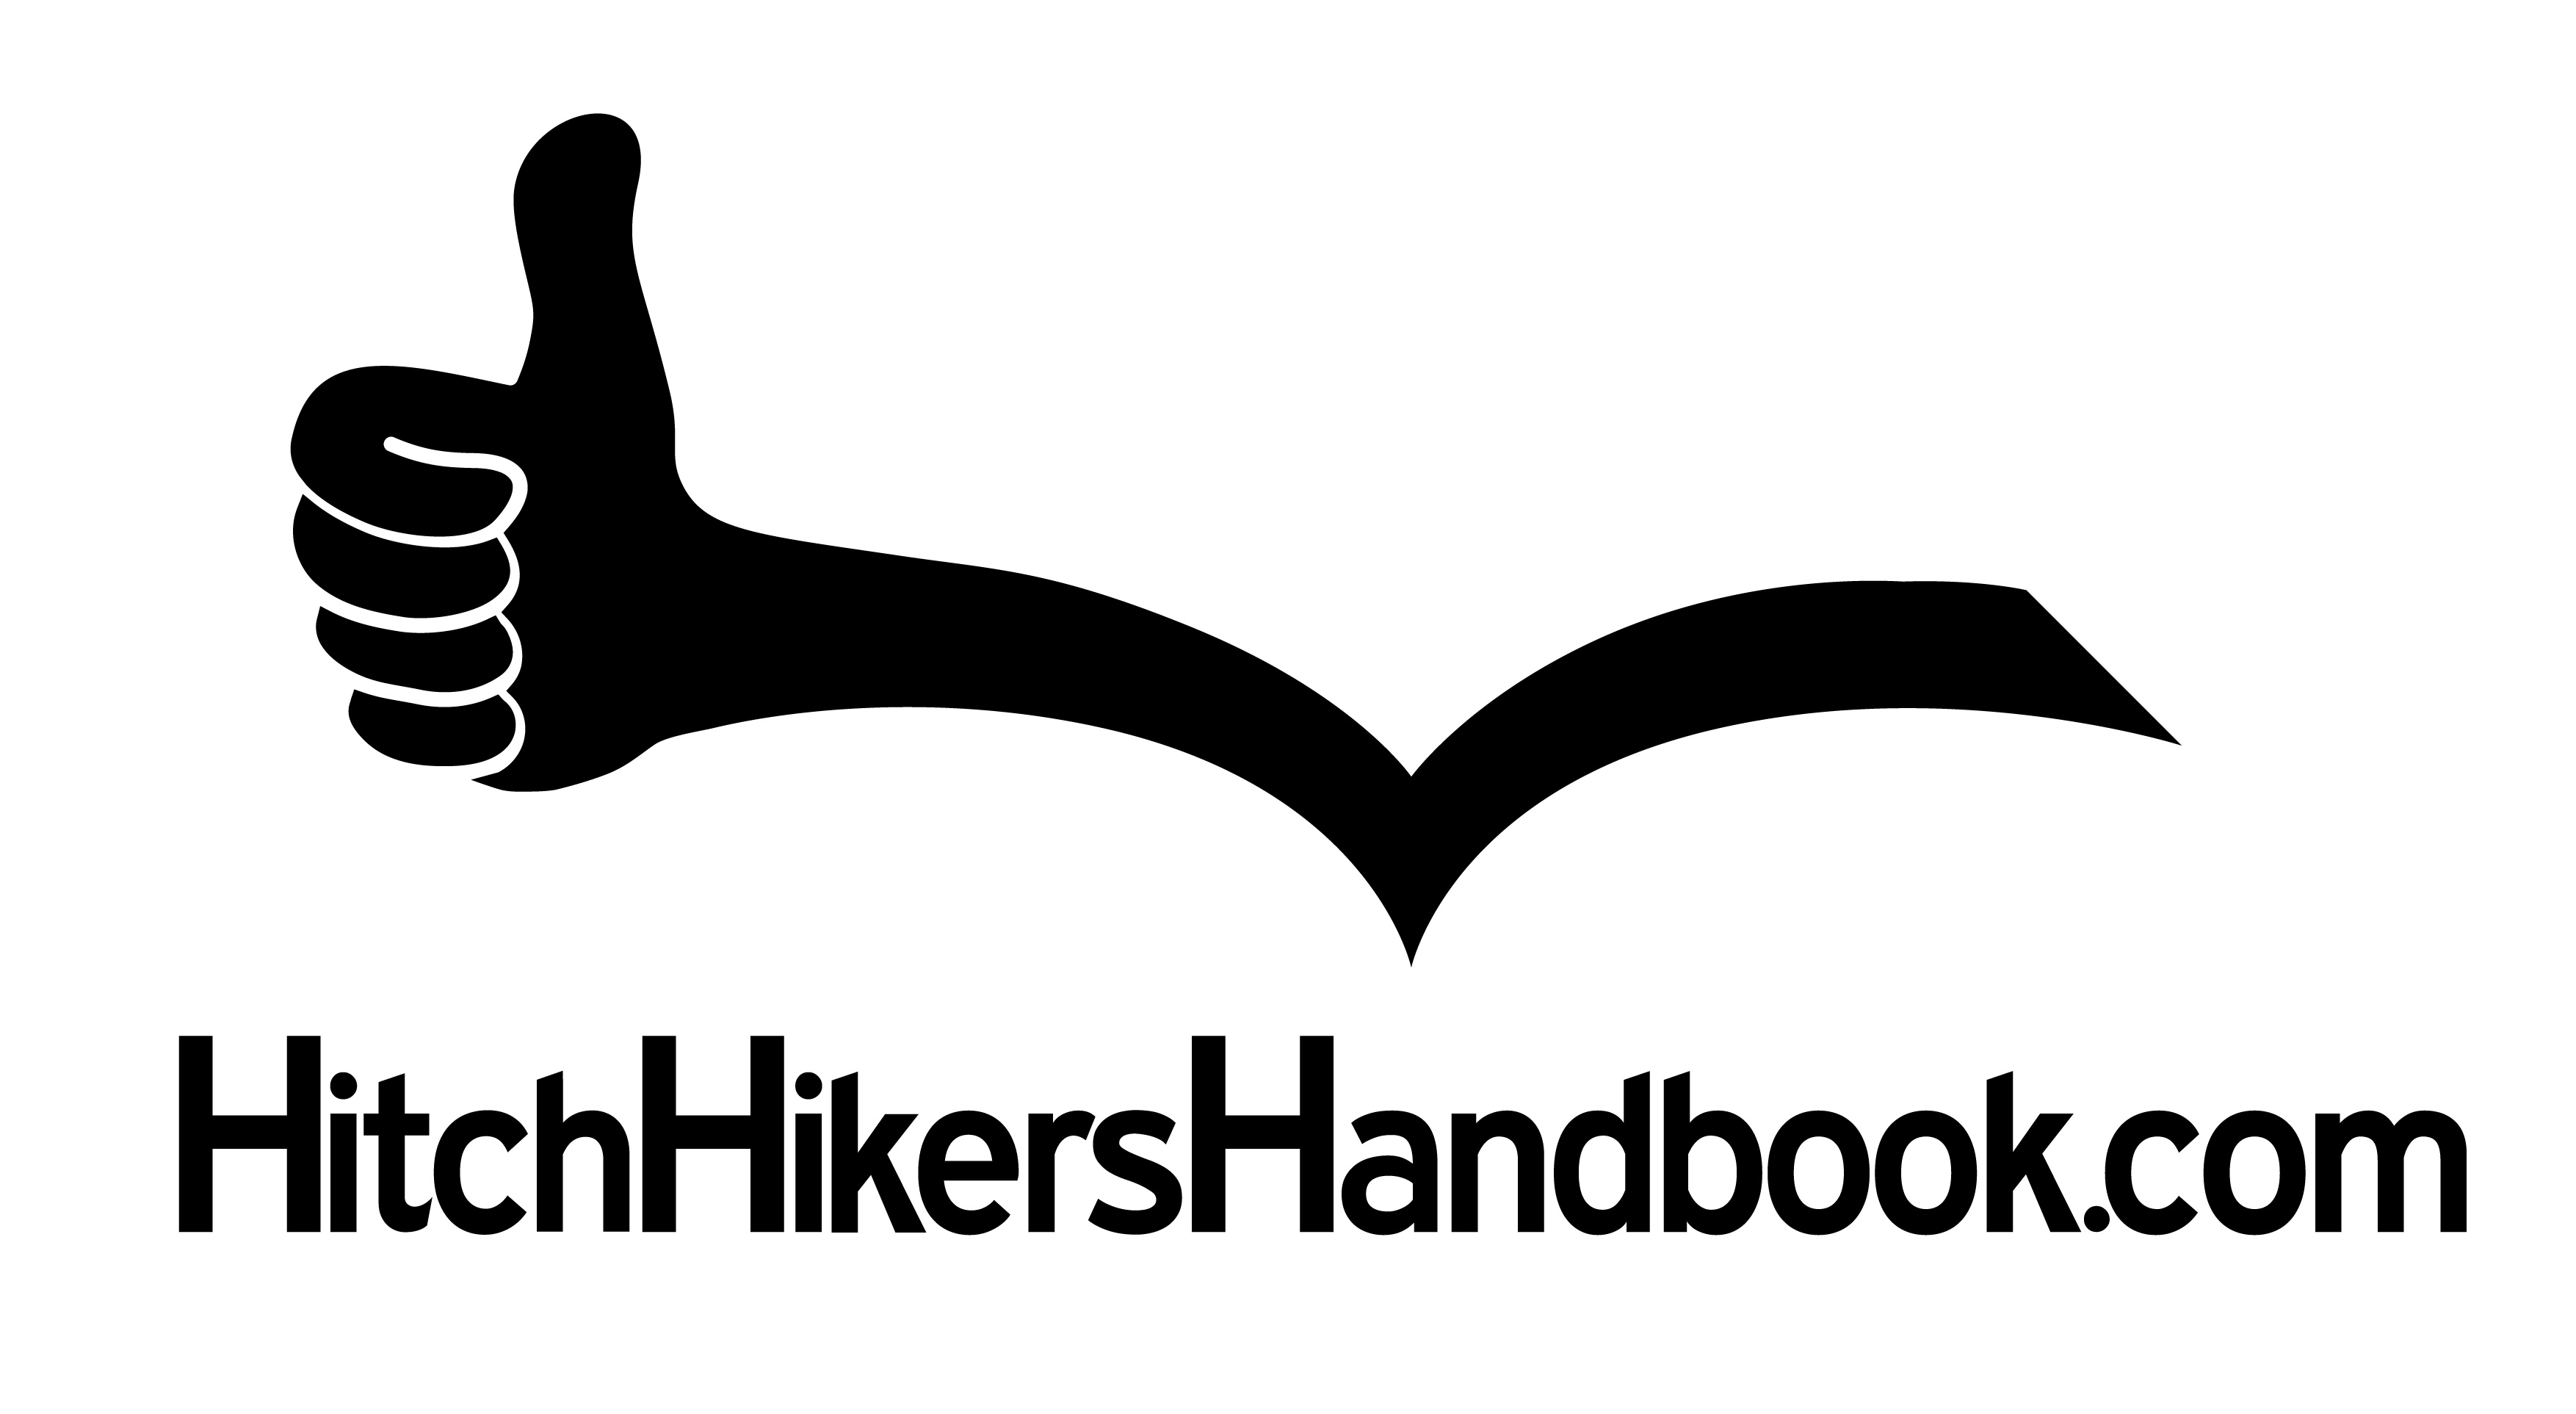 Hitch лого. Hitch hike шрифт. Logo Guidebook. Books have been with us